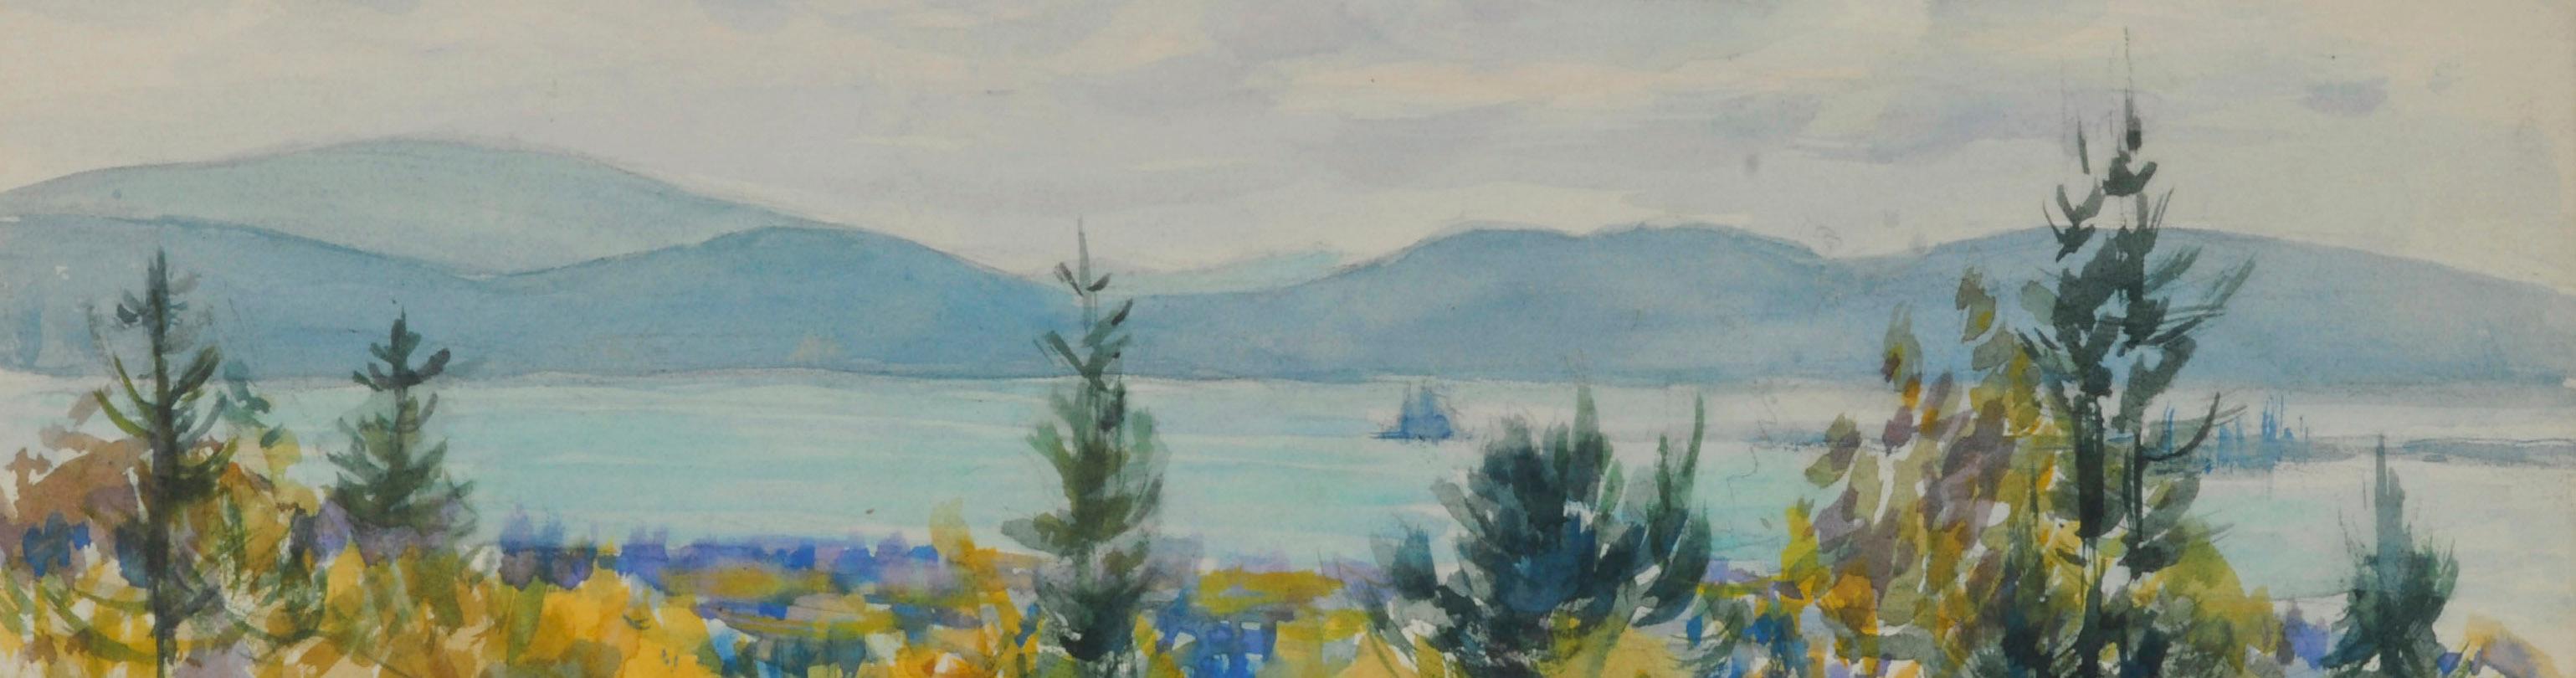 West Gouldsboro (Looking Across Mt. Desert Narrows)
Watercolor on paper, c. 1945-1955
Unsigned
Provenance: Estate of the Artist
Condition: Excellent
Image/Sheet size: 9 7/8 x 12 1/2 inches
Regarding the Maine subject matter of her watercolors, we